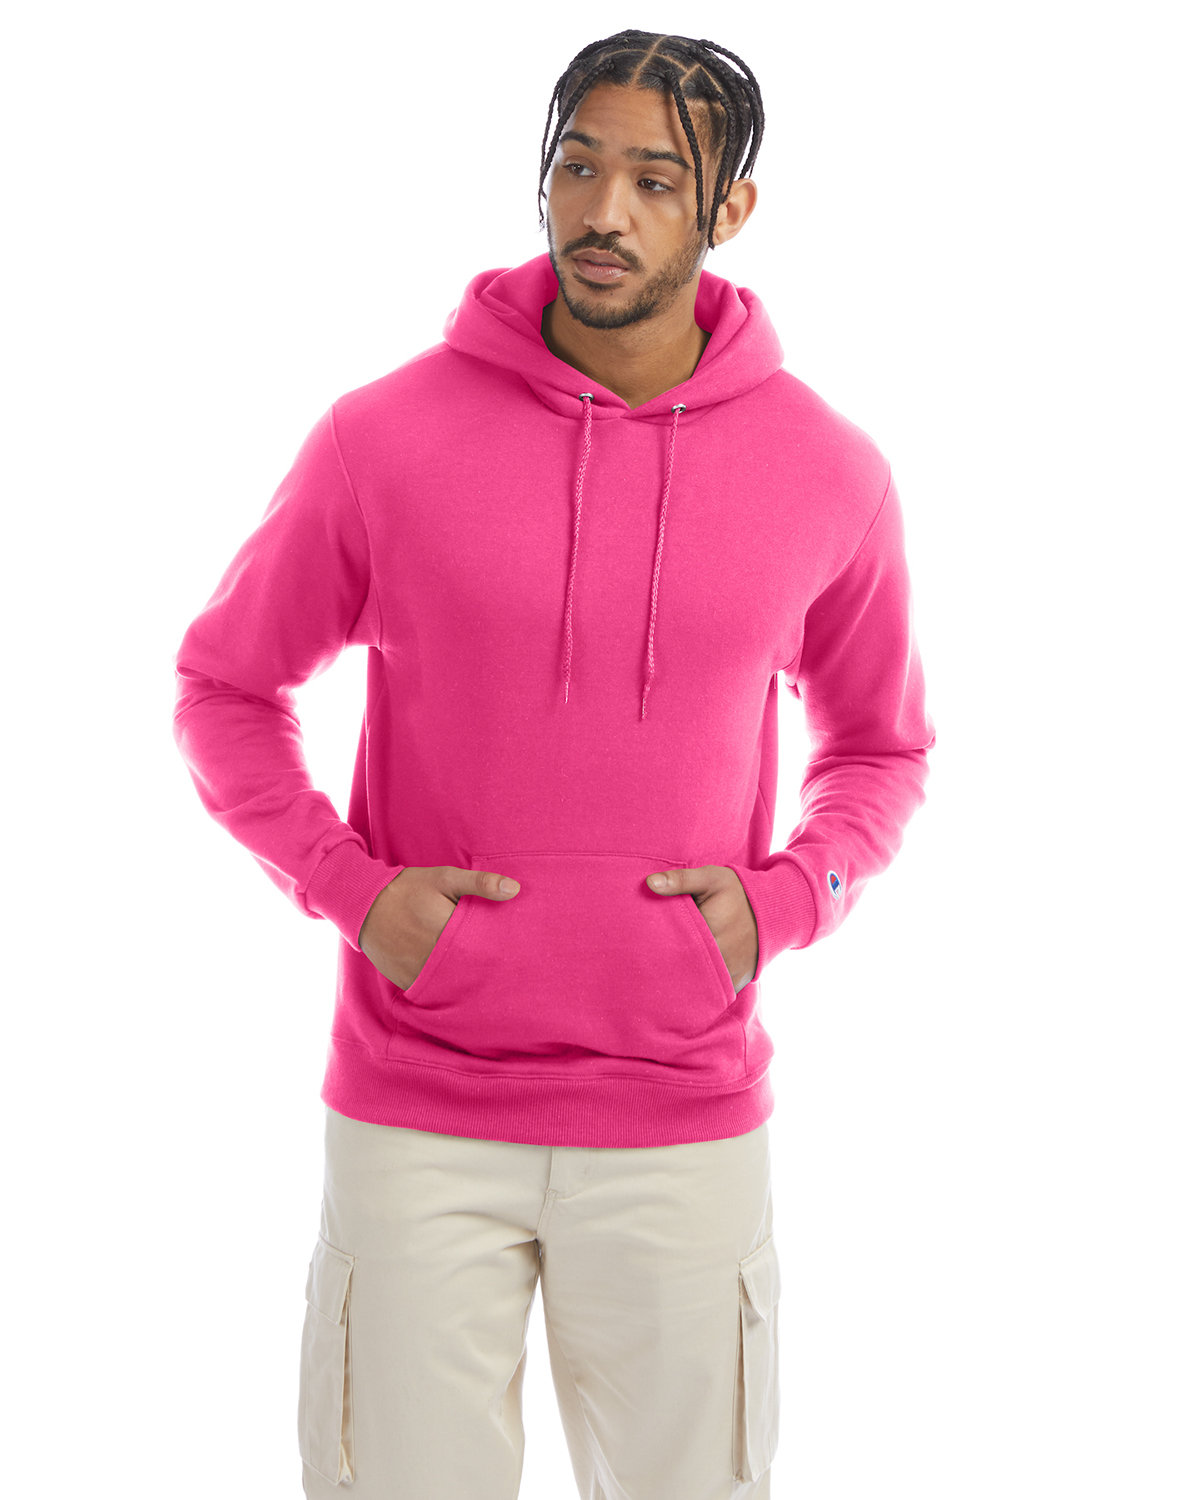 Champion Adult Powerblend® Pullover Hooded Sweatshirt wow pink 